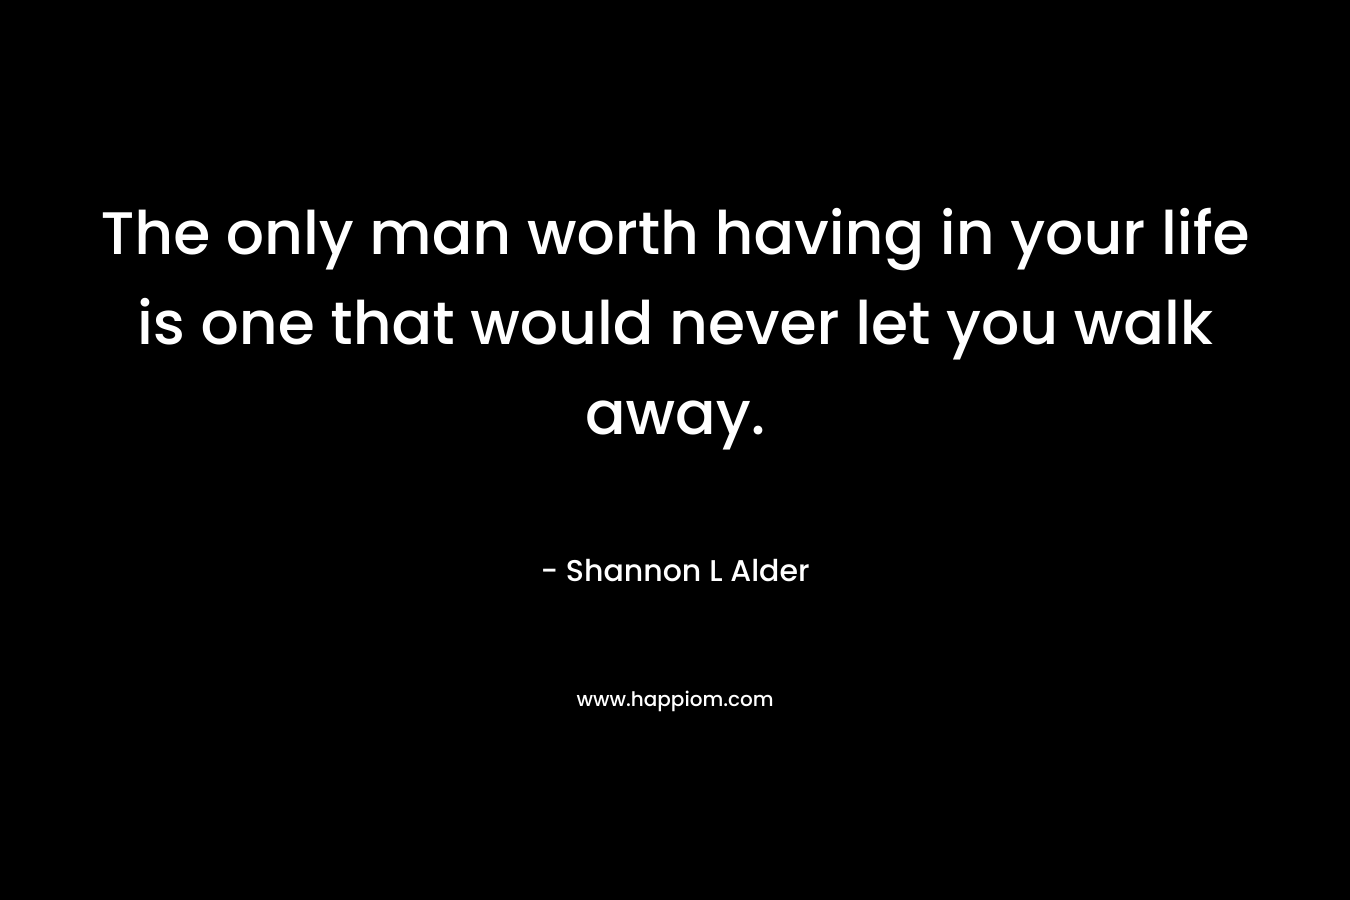 The only man worth having in your life is one that would never let you walk away.